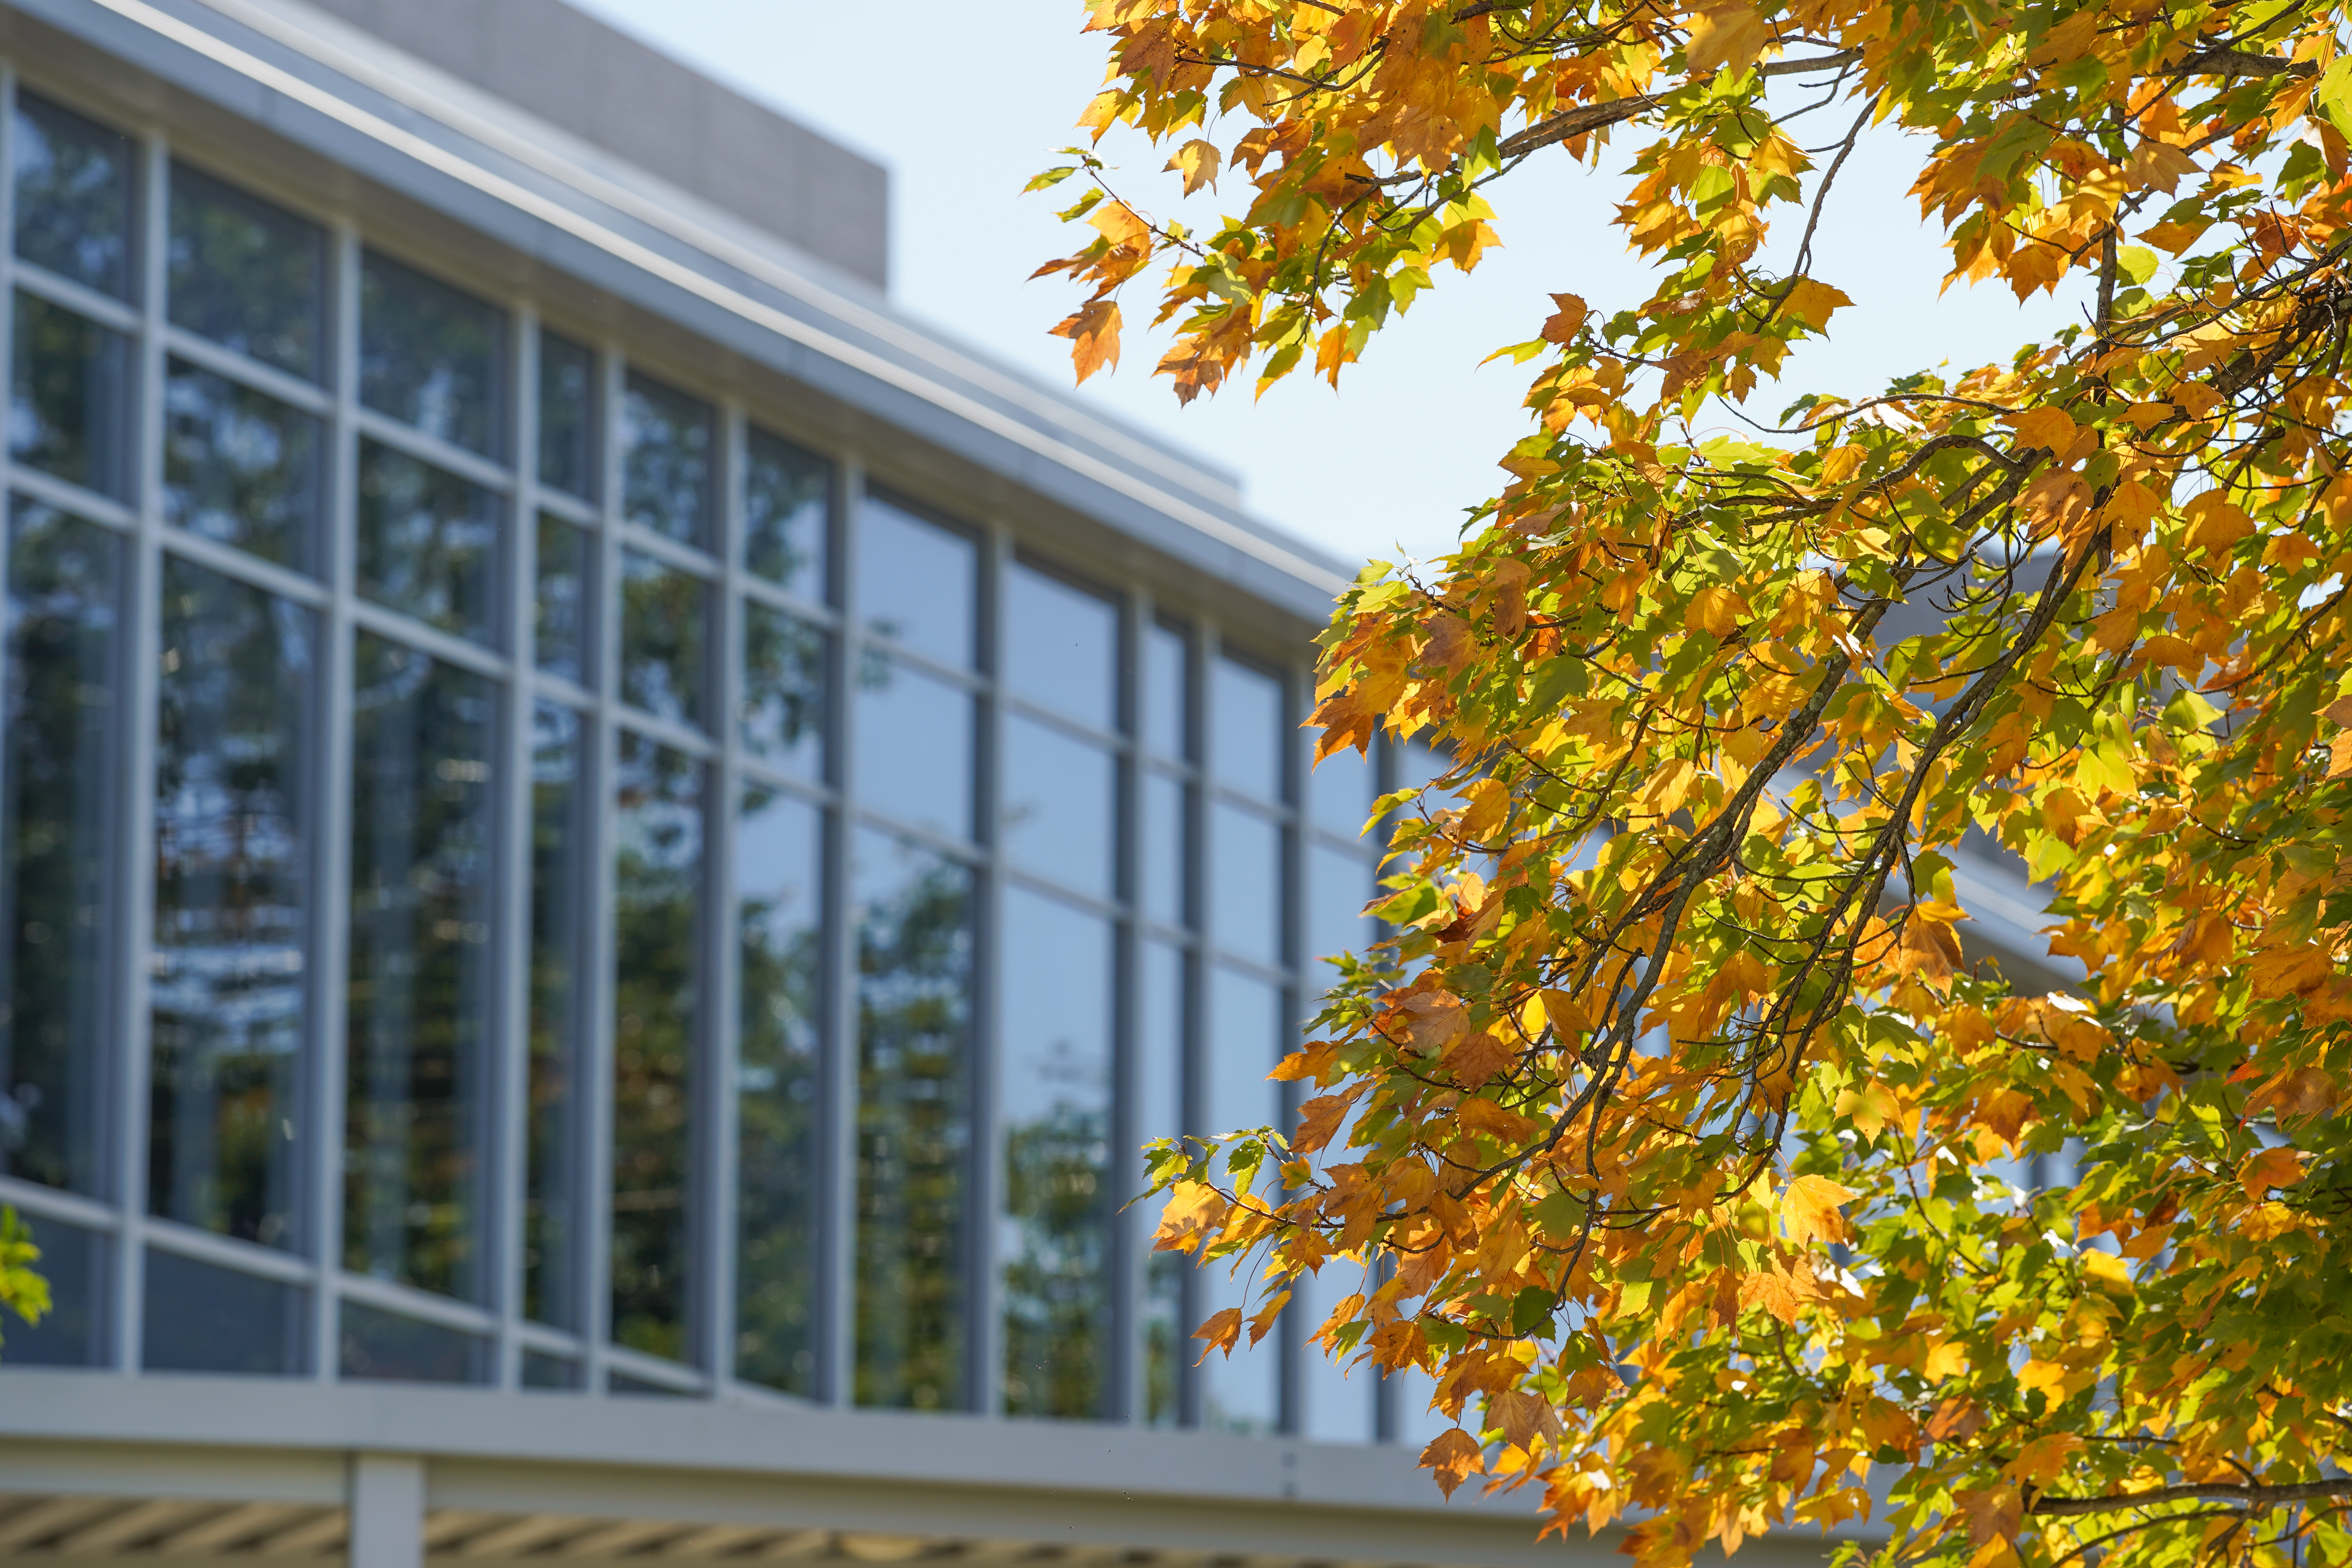 Image of Health Science Center with autumn leaves in foreground